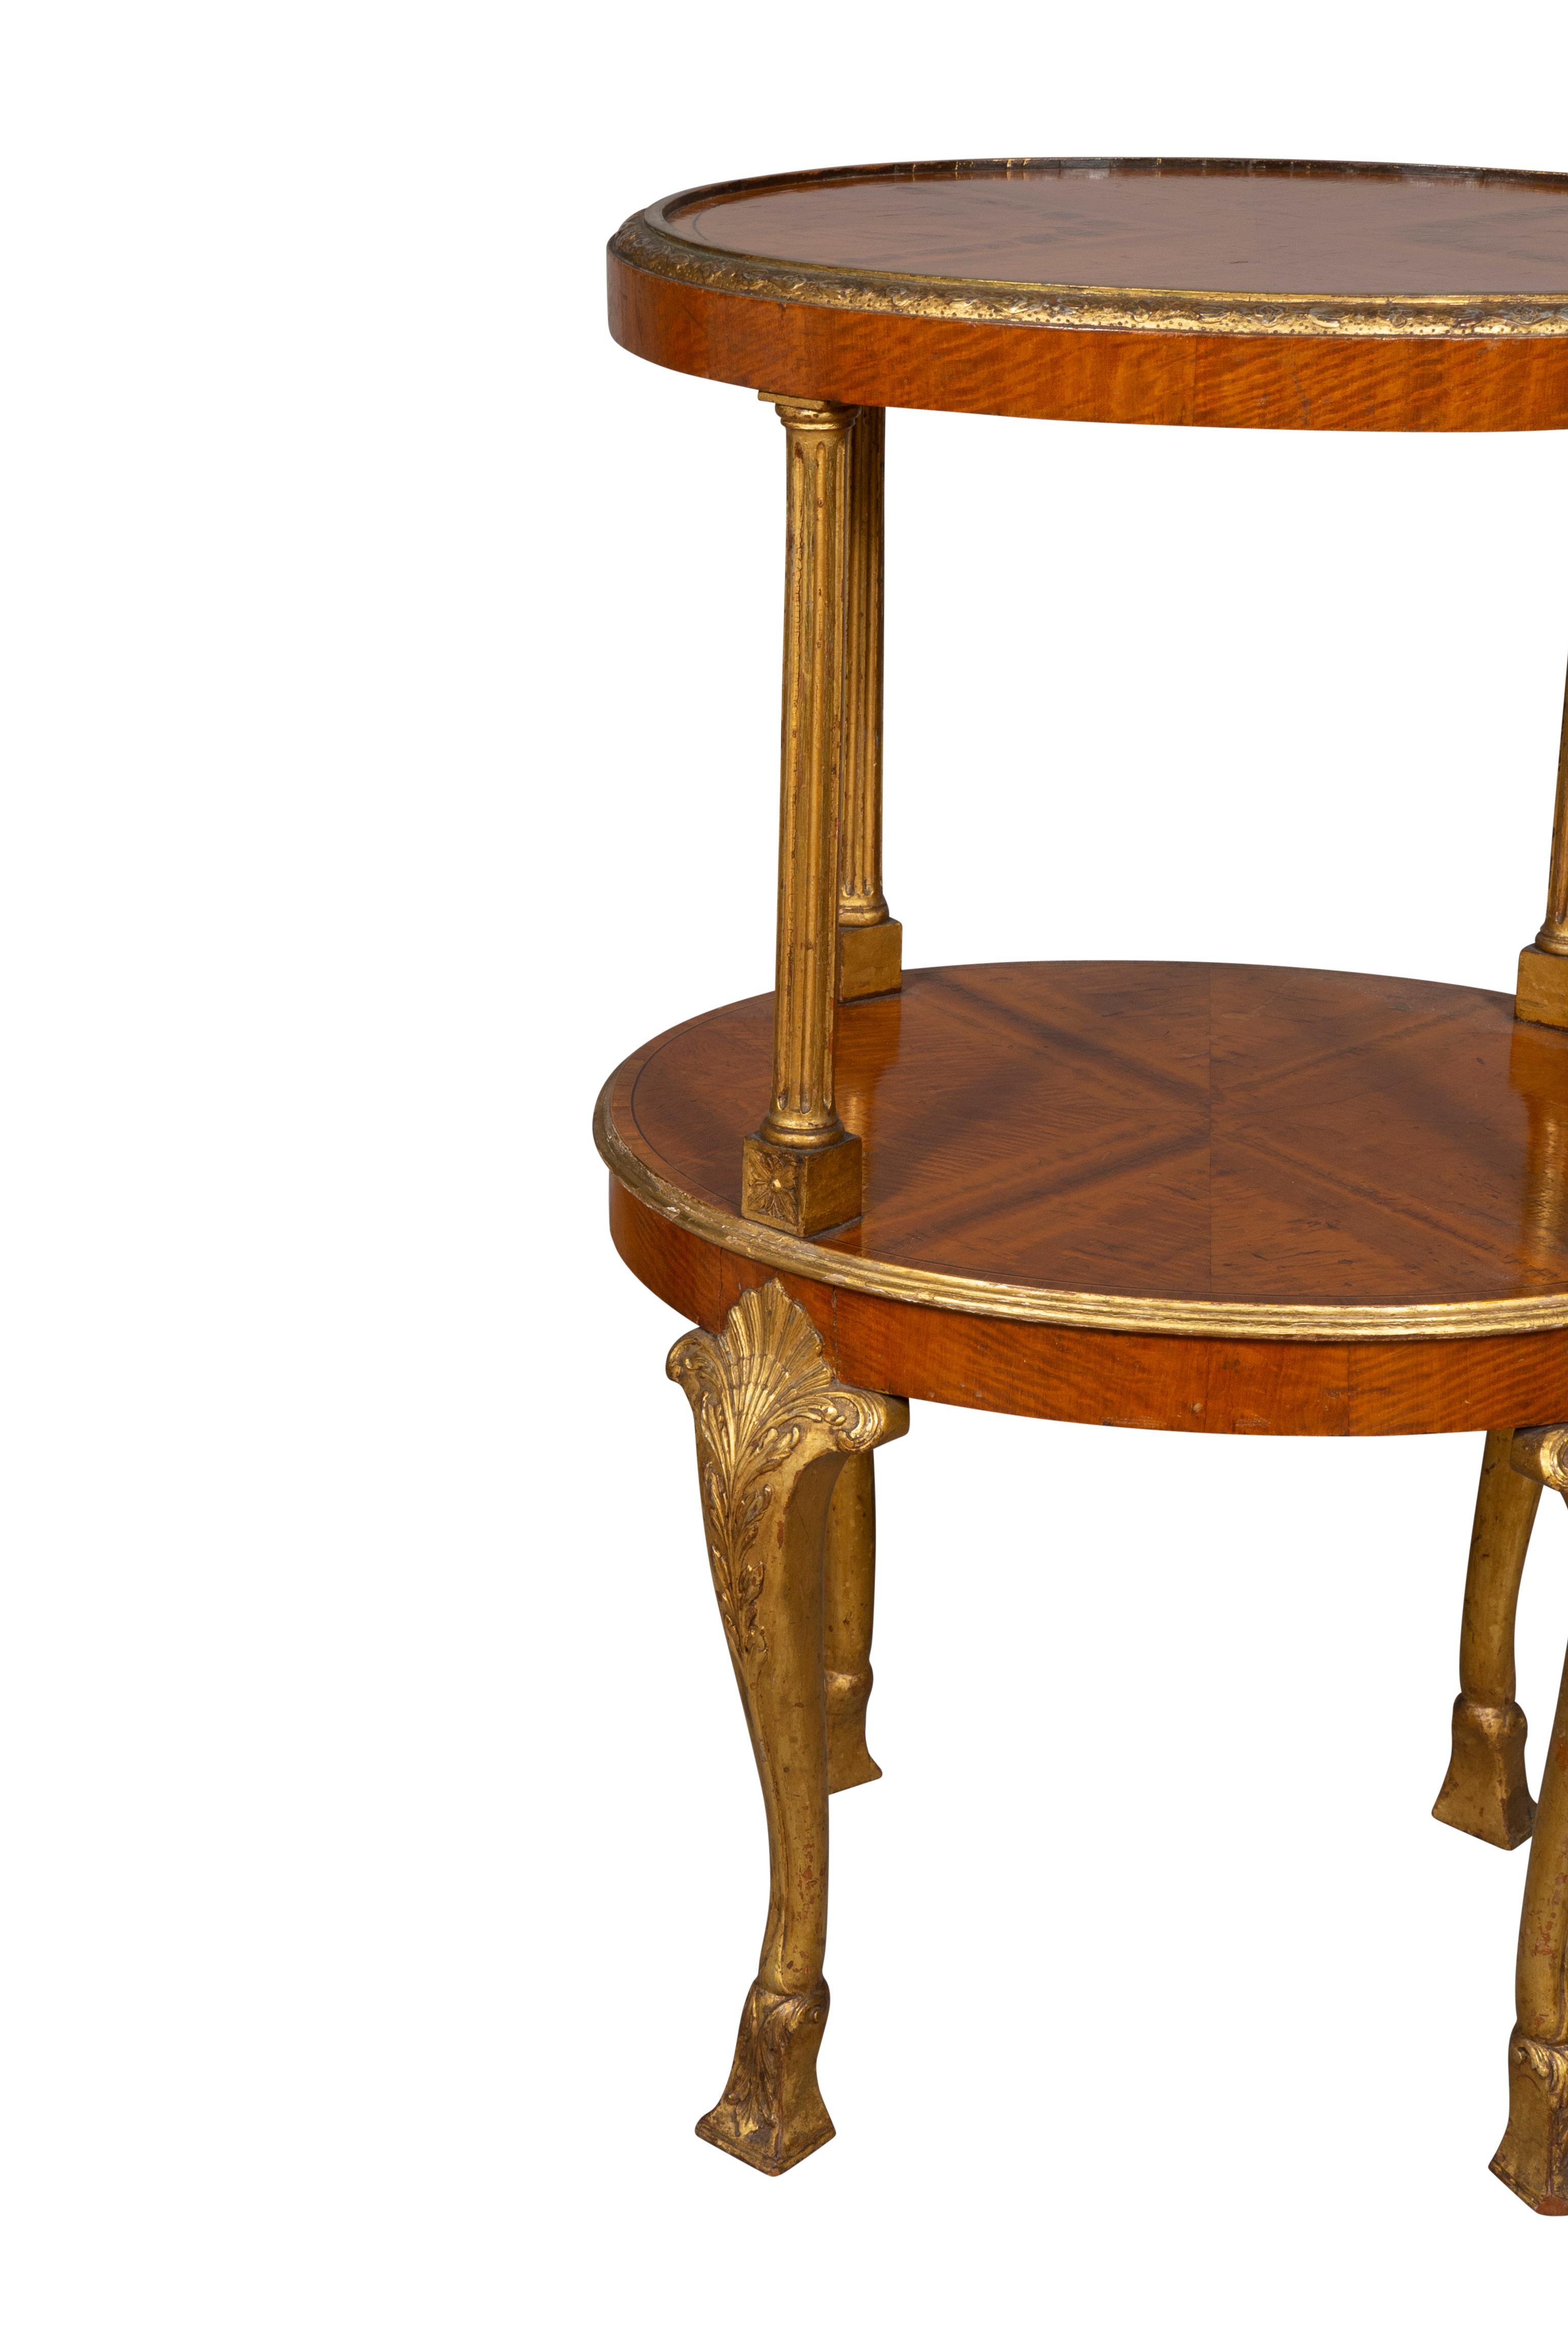 Early 18th Century Edwardian Satinwood and Gilded Table For Sale